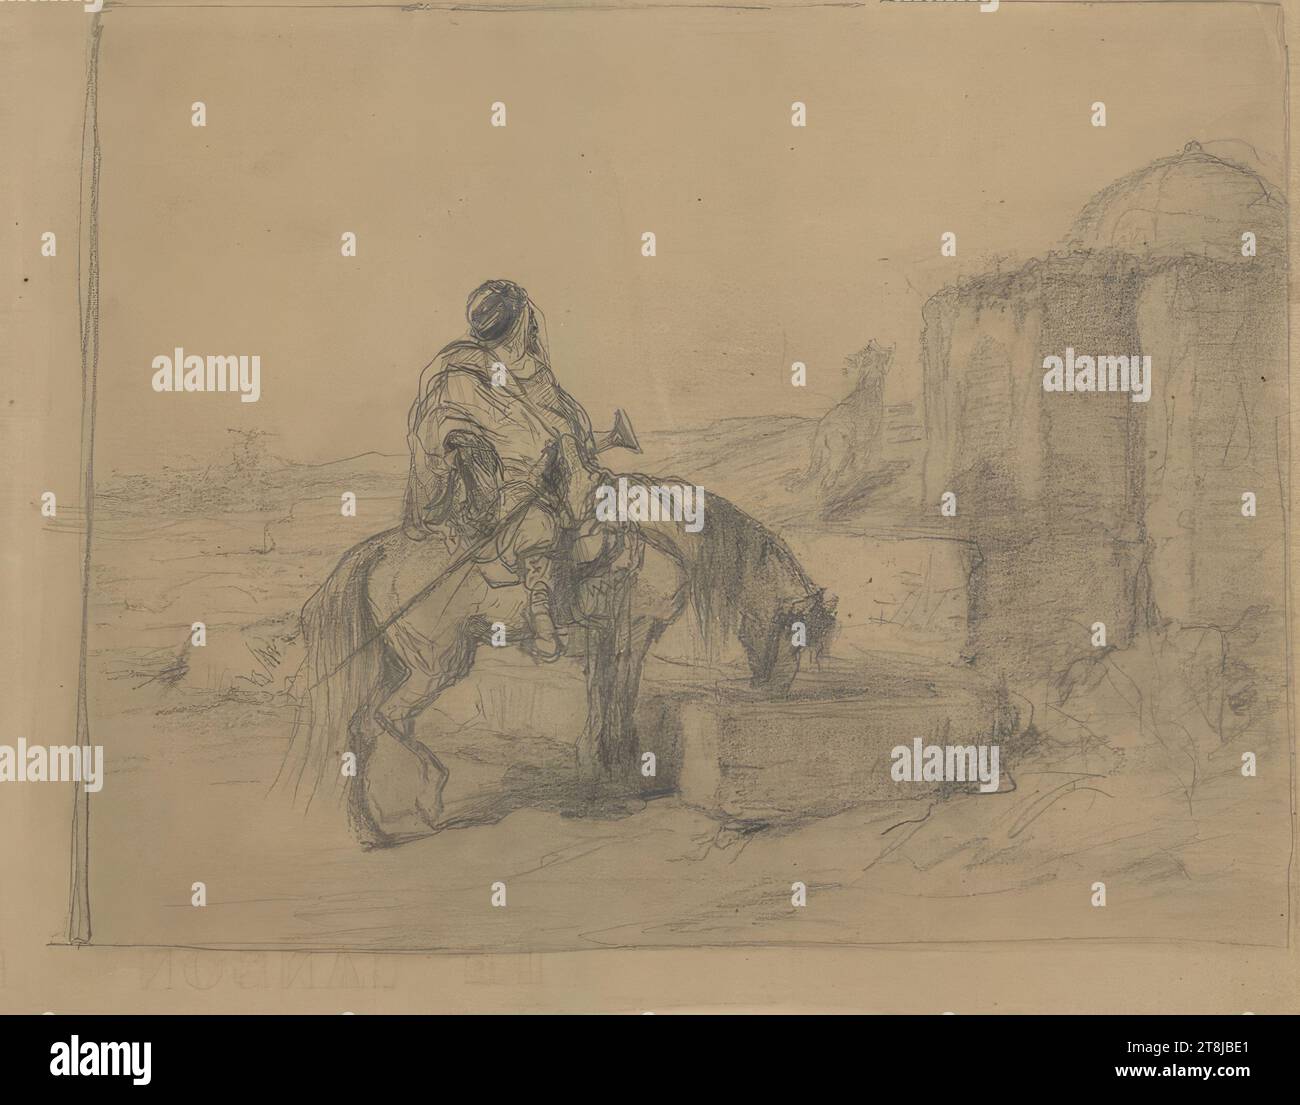 Arabian rider with a dog at the fountain, Christian Adolf Schreyer, Frankfurt am Main 1828 - 1899 Kronberg im Taunus, 19th century, drawing, both sides: pencil, wiped, on brownish paper; recto: pencil border line around the depiction, 227 x 287 mm, verso: middle top: '68', pencil, etched, re. bottom: '3', lead Stock Photo